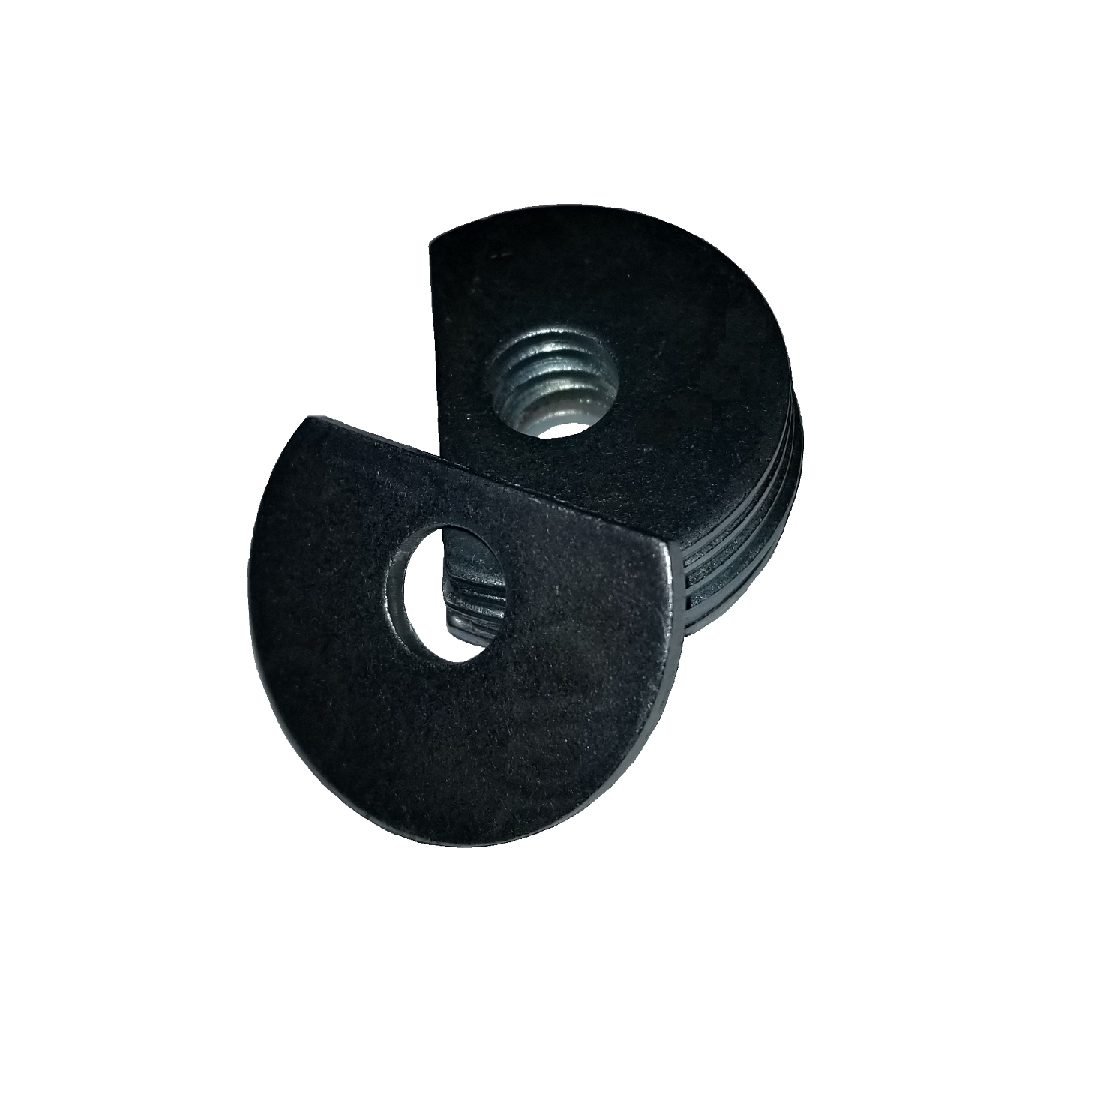 Clipped OD Washer - 0.375 ID, 0.812 OD, 0.067 Thick, Spring Steel - Hard